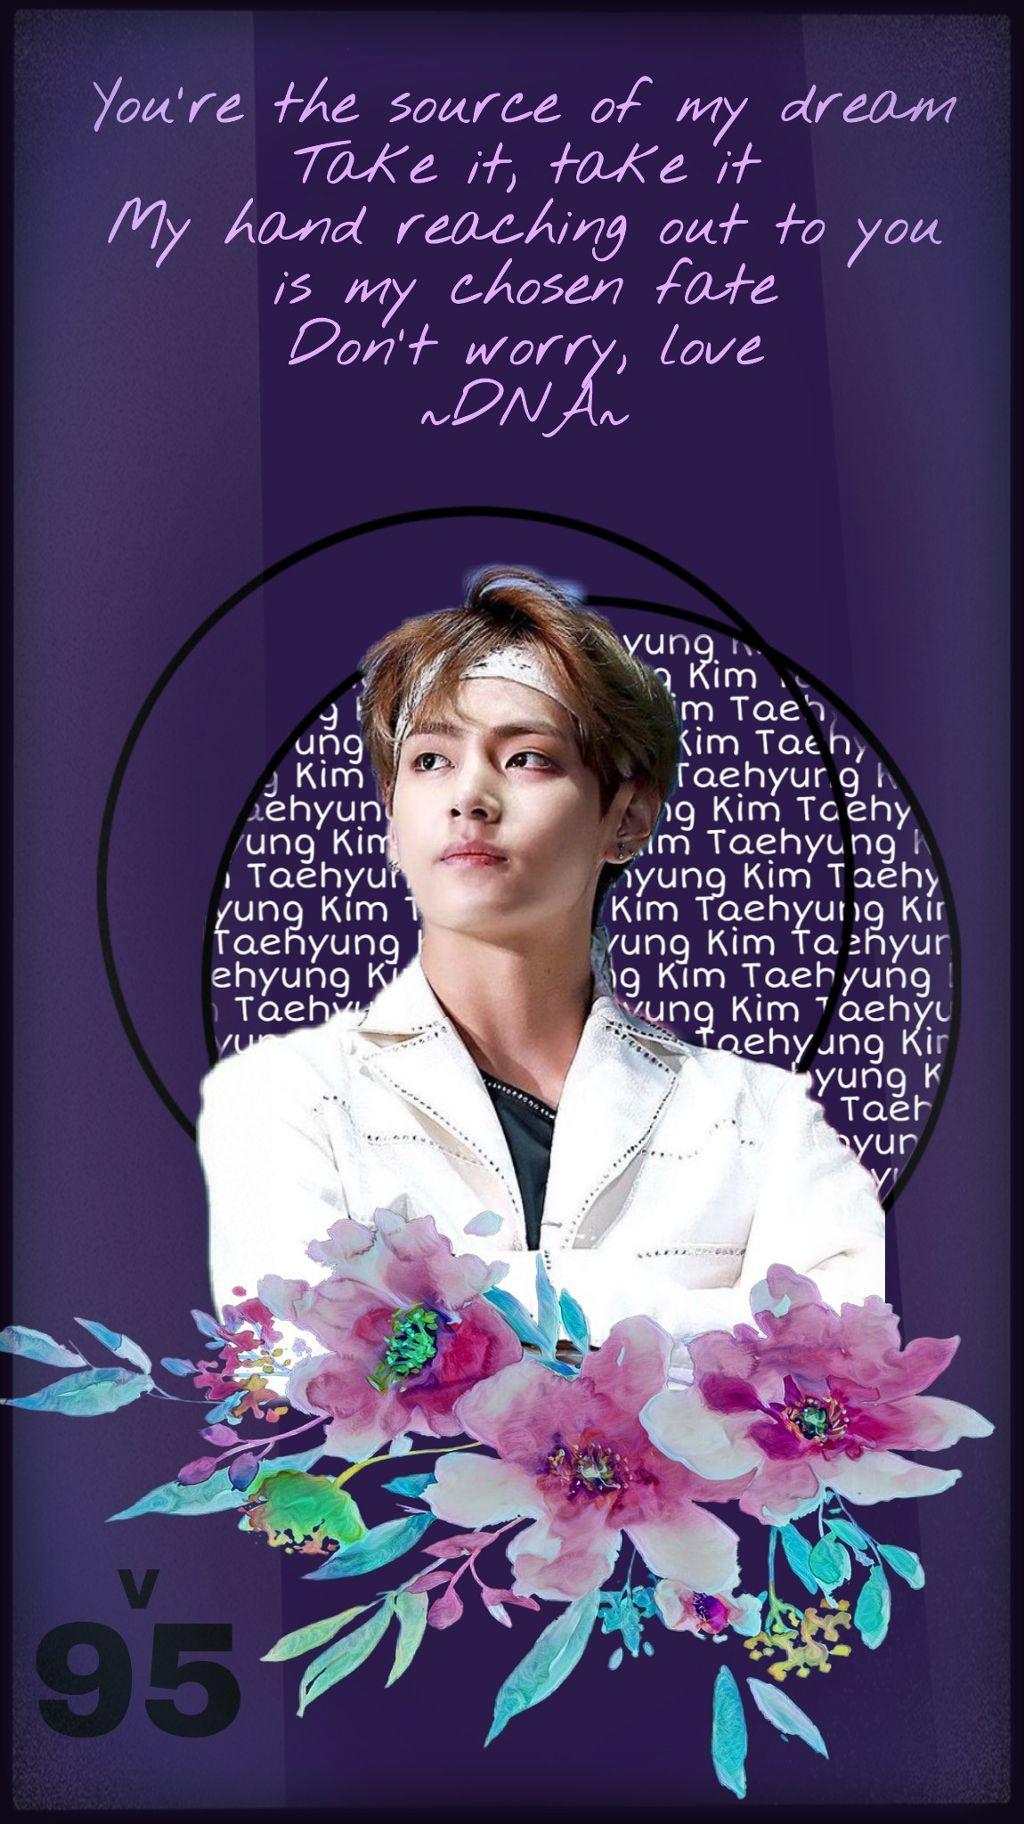 Hello everyone! I'm back with a DNA wallpaper of taehyu